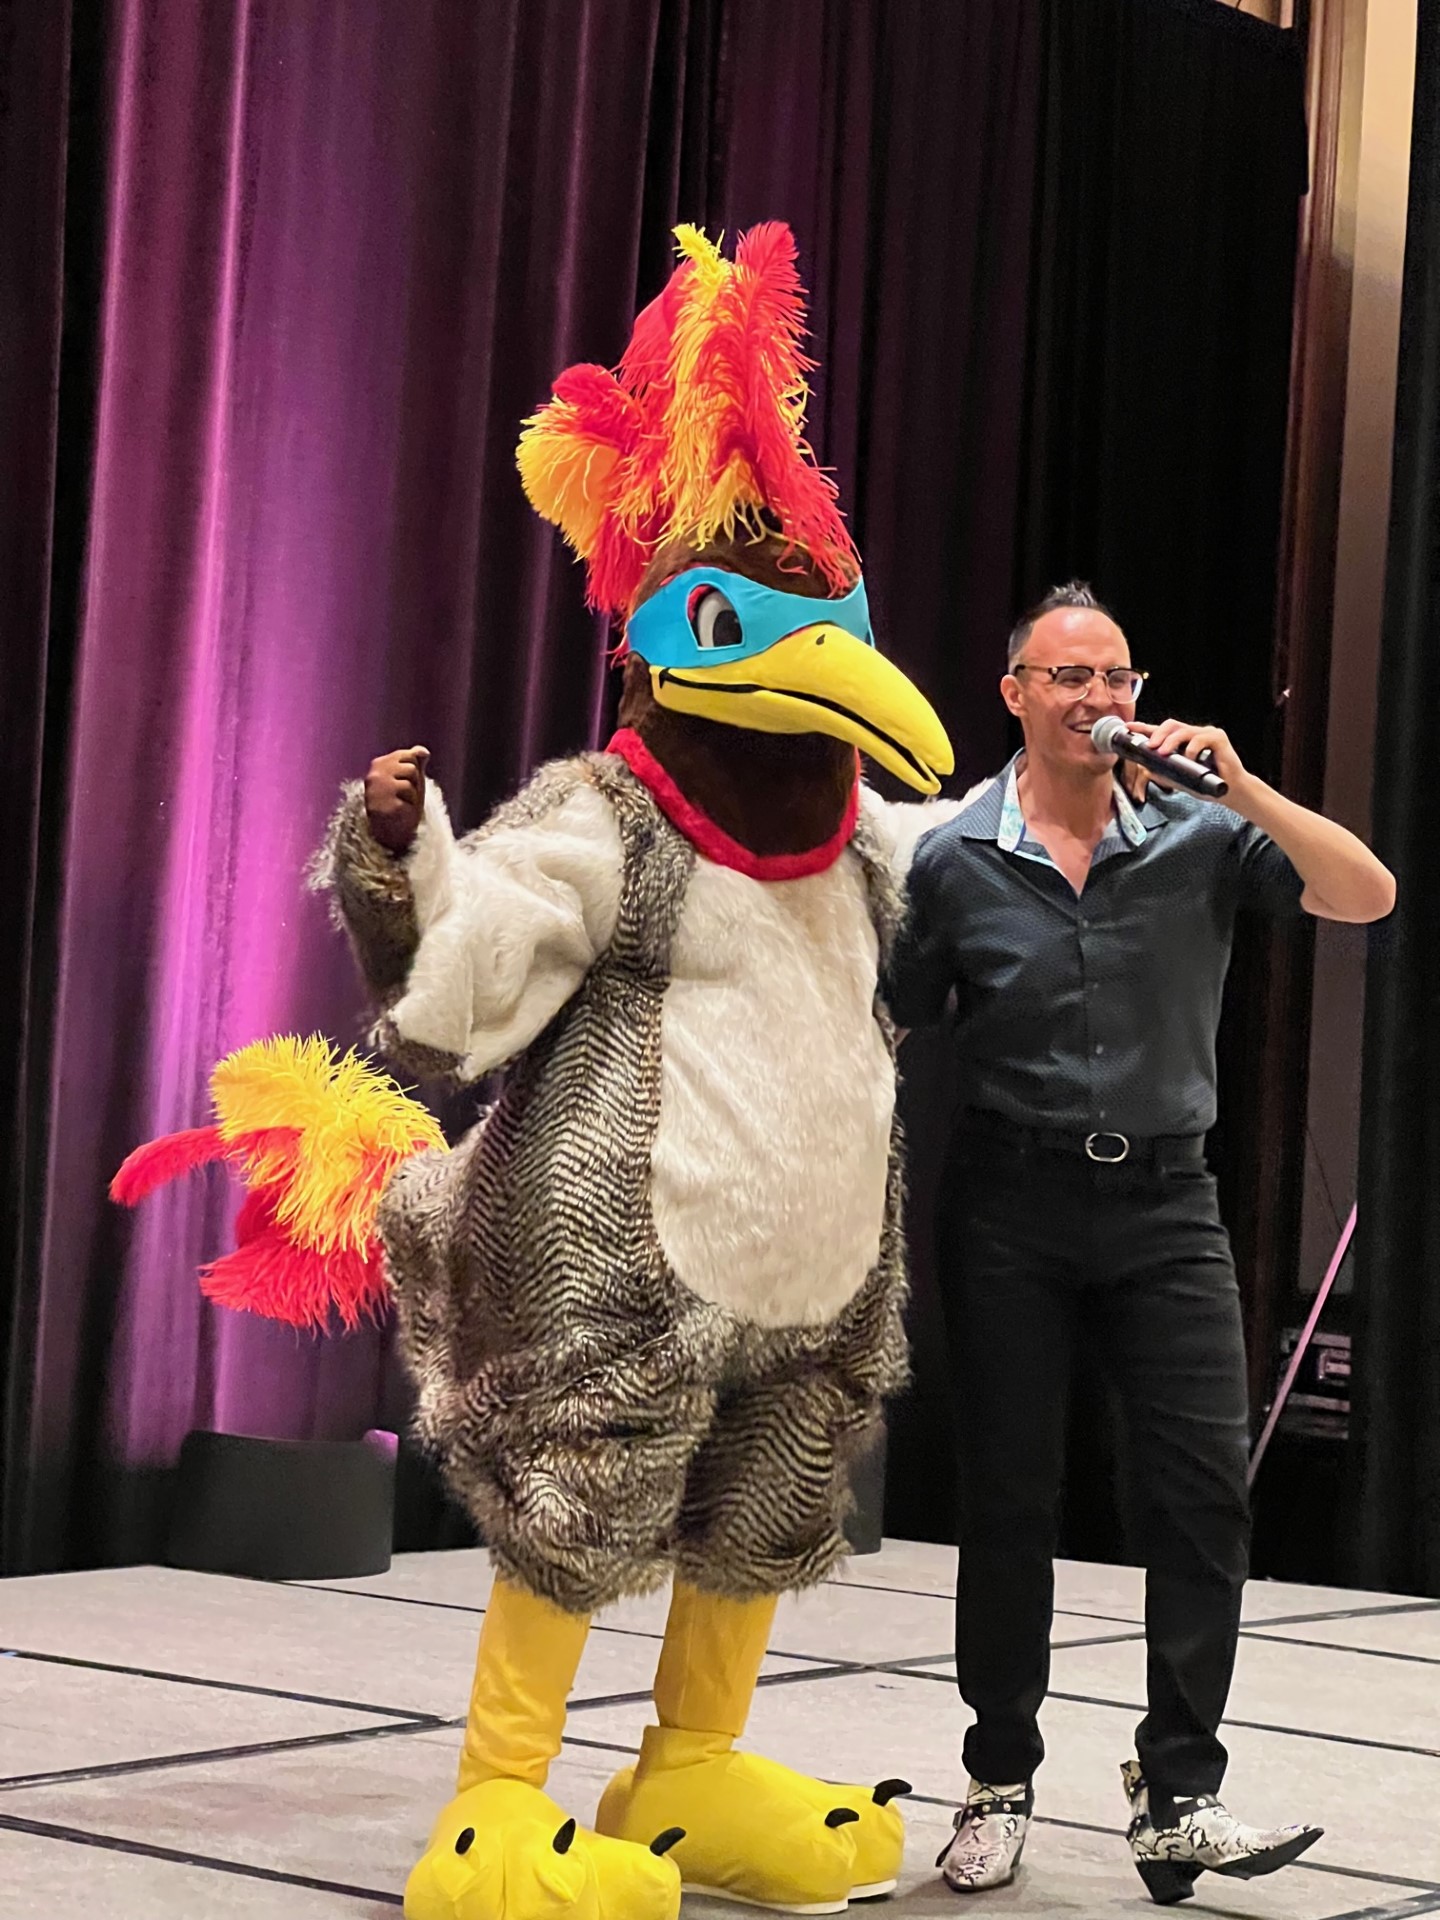 Severo introduces Ricky the Roadrunner